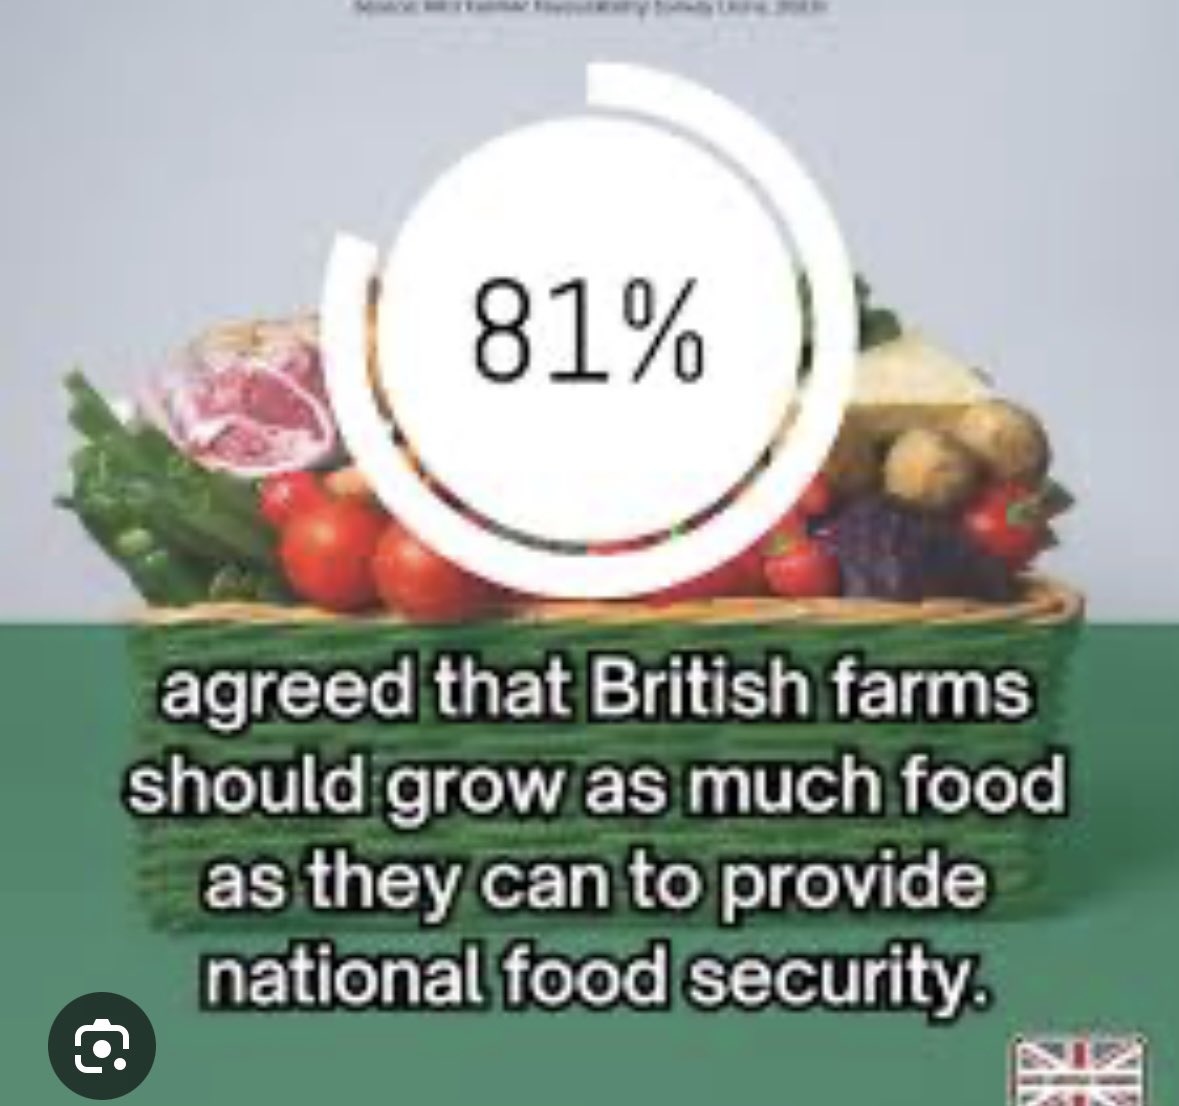 Is the government listening? The public overwhelmingly back British farmers and food 🚜 🇬🇧